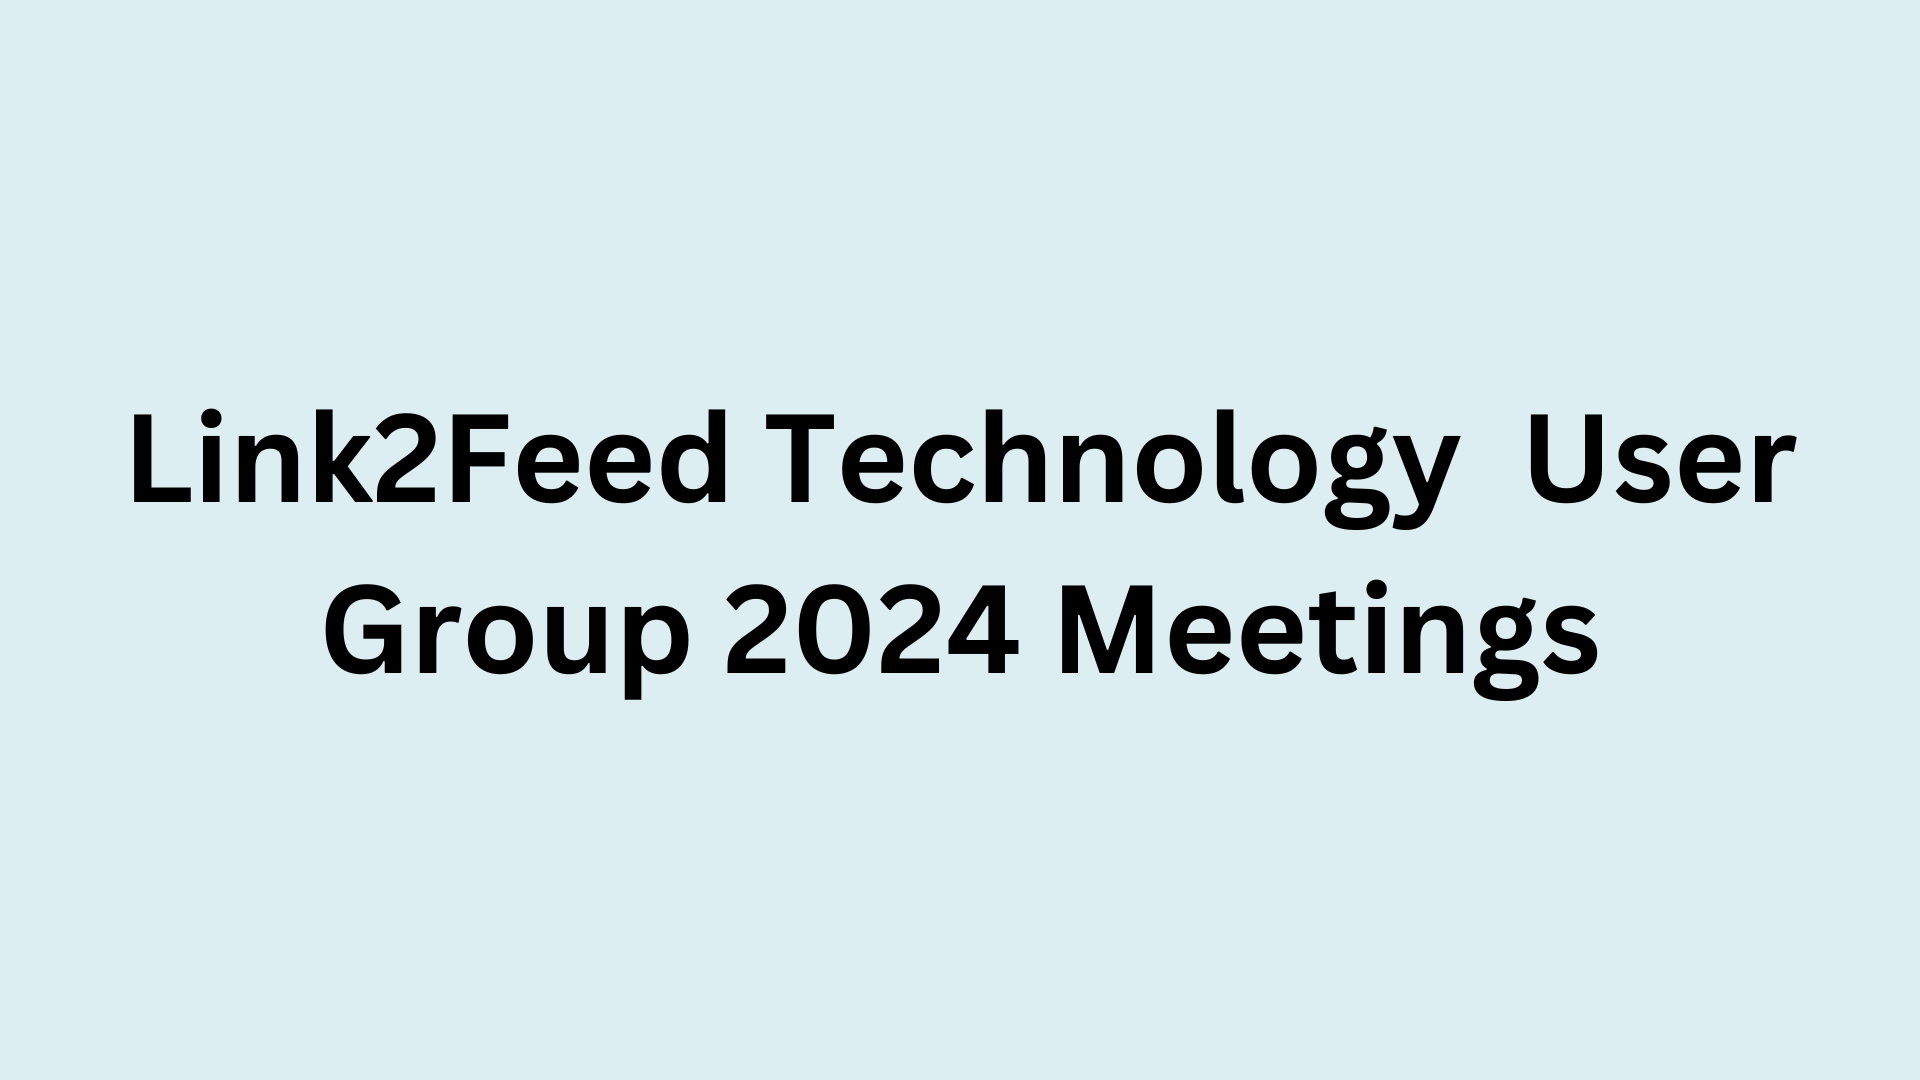 The Link2Feed Technology User Group 2024 Meetings